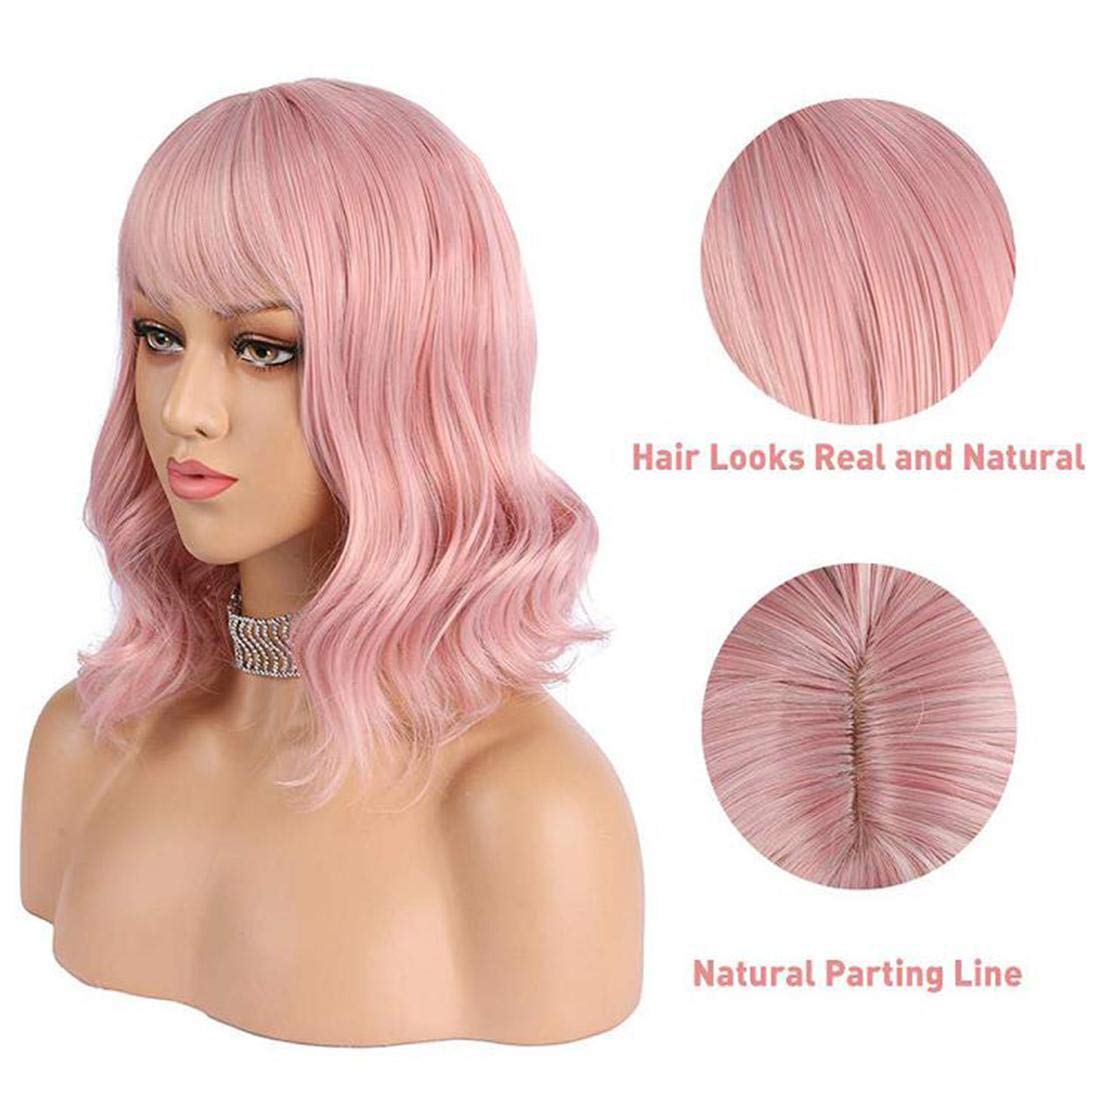 Wavy Wig With Bangs Short Bob Purple Wig for Women Shoulder Length Curly Wavy Synthetic Cosplay Wig for Girl Pastel Colorful Costume Wigs Adjustable Strap Not Slip Off Realistic Nice Looking-1